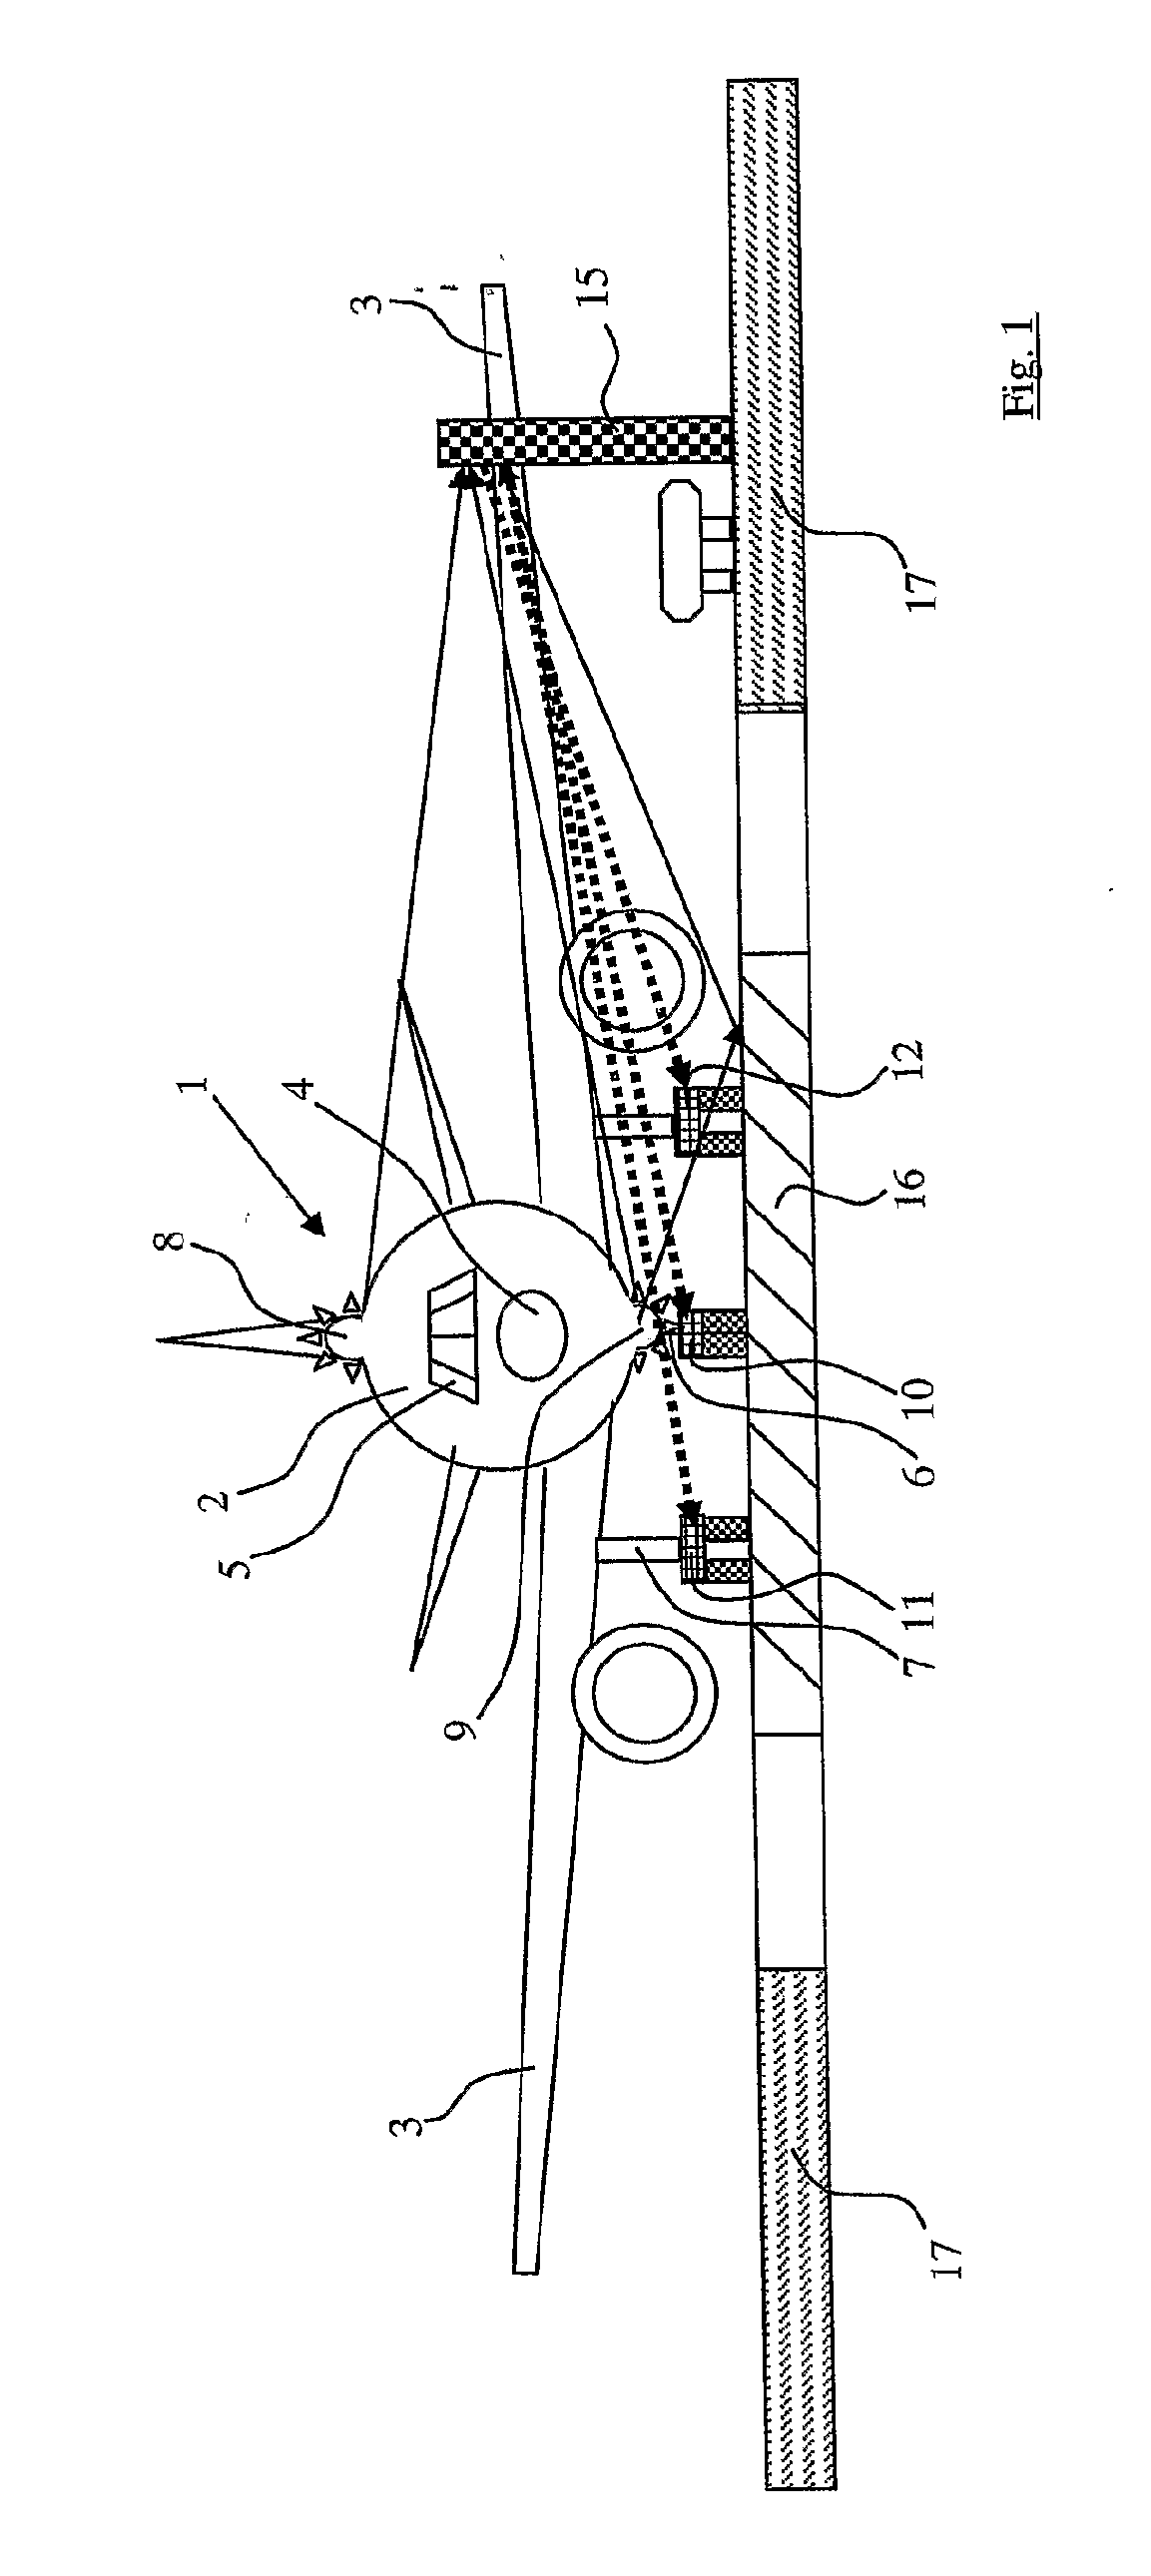 Collision Avoidance Warning And Taxi Guidance Device